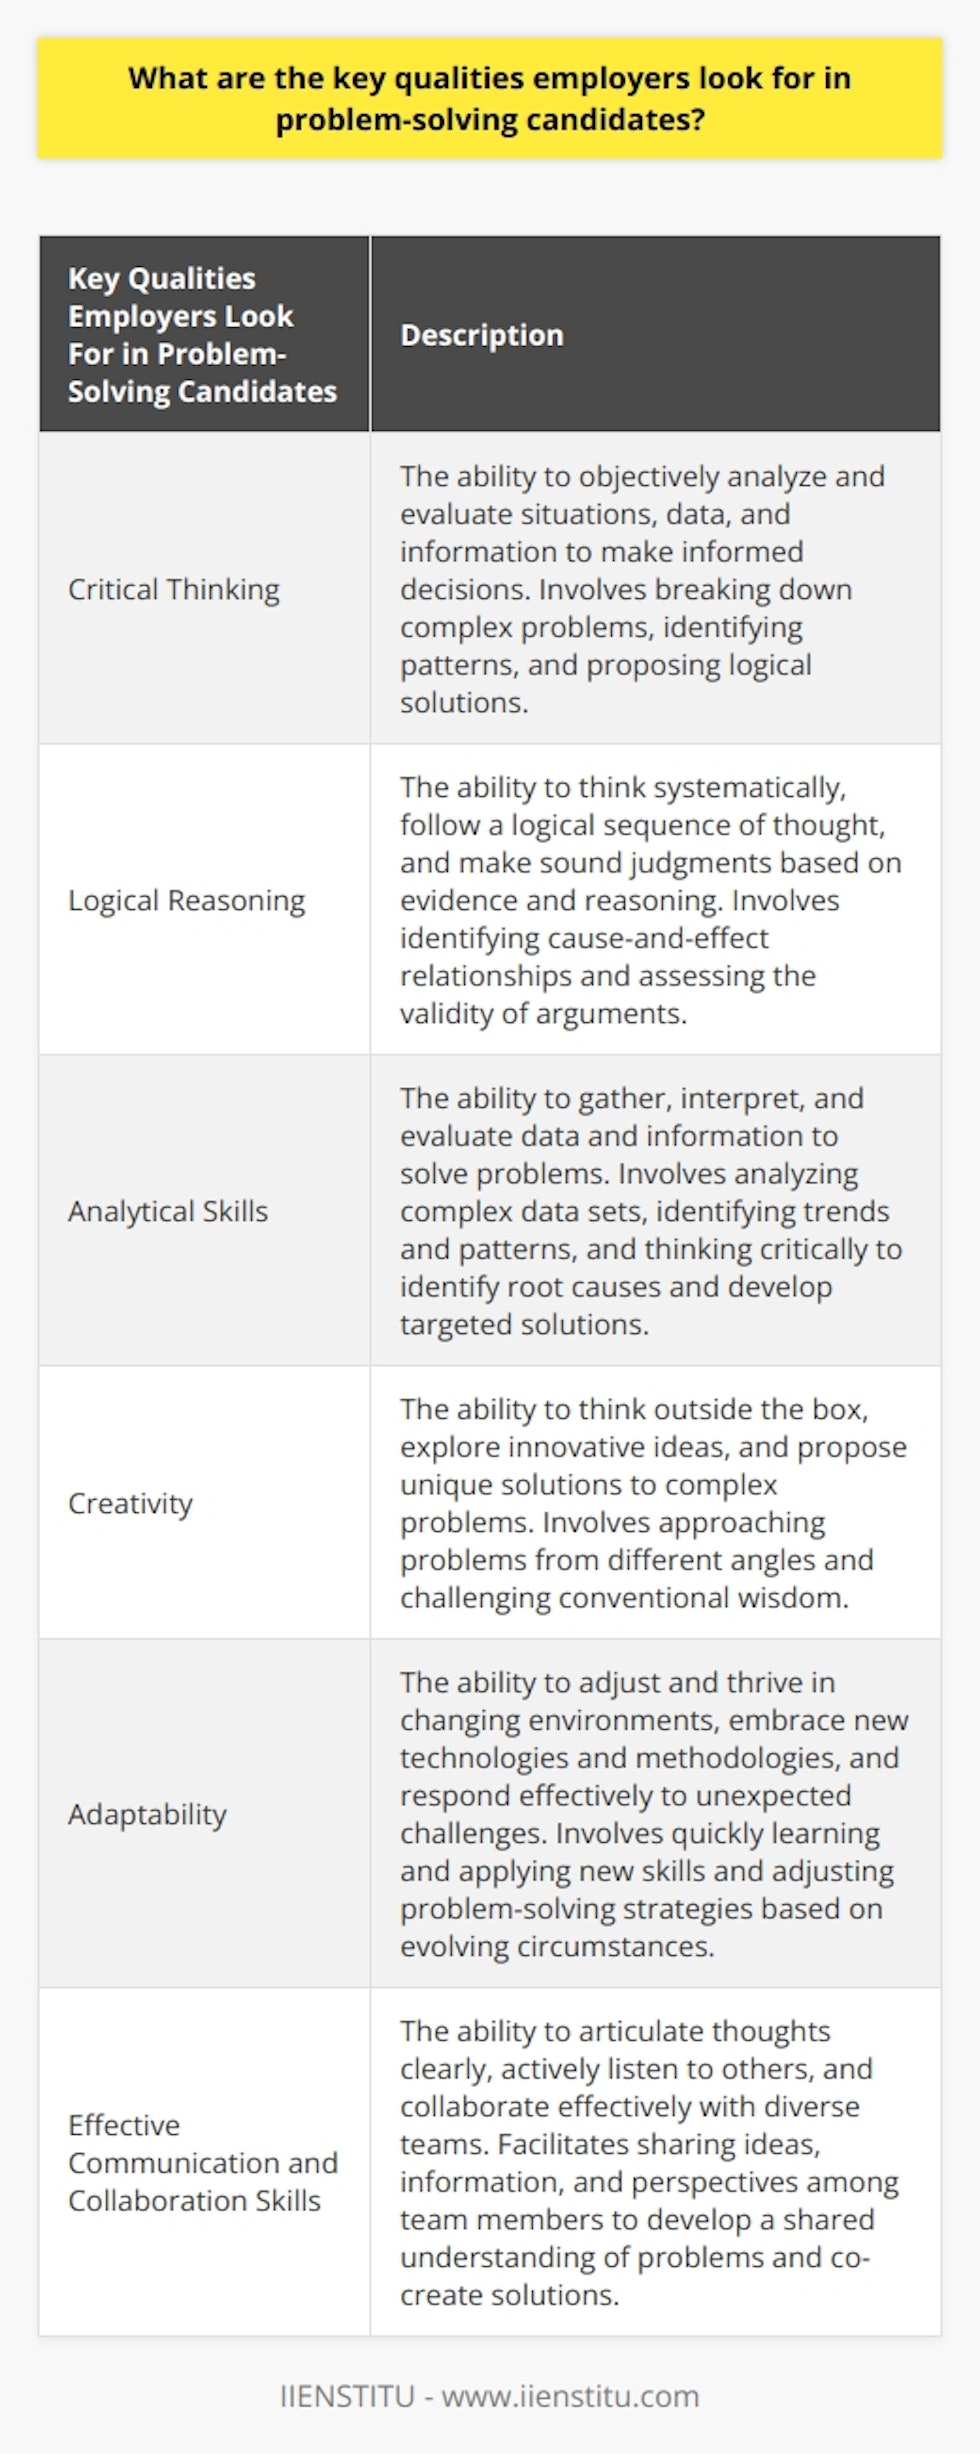 These key qualities play a vital role in problem-solving as they enable candidates to effectively identify, analyze, and develop innovative solutions to complex issues. Critical thinking is a fundamental quality that employers value in problem-solving candidates. It involves the ability to objectively analyze and evaluate situations, data, and information to make informed decisions. Candidates who possess critical thinking skills can effectively break down complex problems into smaller components, identify patterns, evaluate different perspectives, and propose logical solutions. Logical reasoning is another crucial quality that employers seek in problem-solving candidates. It involves the ability to think systematically, follow a logical sequence of thought, and make sound judgments based on evidence and reasoning. Candidates with strong logical reasoning skills can effectively identify cause-and-effect relationships, assess the validity of arguments, and make rational decisions.Analytical skills are highly sought after by employers as they enable candidates to gather, interpret, and evaluate data and information to solve problems. Candidates with strong analytical abilities can effectively analyze complex data sets, identify trends and patterns, and draw meaningful conclusions. These skills also involve the ability to think critically and identify the root causes of problems, allowing candidates to develop targeted and effective solutions.Creativity is another key quality that employers value in problem-solving candidates. It involves the ability to think outside the box, explore innovative ideas, and propose unique solutions to complex problems. Candidates who possess creativity can approach problems from different angles, challenge conventional wisdom, and develop novel approaches that lead to breakthrough solutions.Adaptability is an essential quality that employers seek in problem-solving candidates. It involves the ability to adjust and thrive in changing environments, embrace new technologies and methodologies, and effectively respond to unexpected challenges. Candidates with strong adaptability can quickly learn and apply new skills, adjust their problem-solving strategies based on evolving circumstances, and effectively navigate uncertain situations.Effective communication and collaboration skills are crucial for problem-solving candidates as they facilitate the sharing of ideas, information, and perspectives among team members. Candidates who can clearly articulate their thoughts, actively listen to others, and collaborate effectively with diverse teams can develop a shared understanding of the problem, leverage collective intelligence, and co-create solutions.In conclusion, employers look for problem-solving candidates who possess critical thinking abilities, logical reasoning, analytical skills, creativity, adaptability, and effective communication and collaboration skills. These qualities enable candidates to effectively analyze and understand complex problems, develop innovative solutions, and contribute to the success of their organizations.